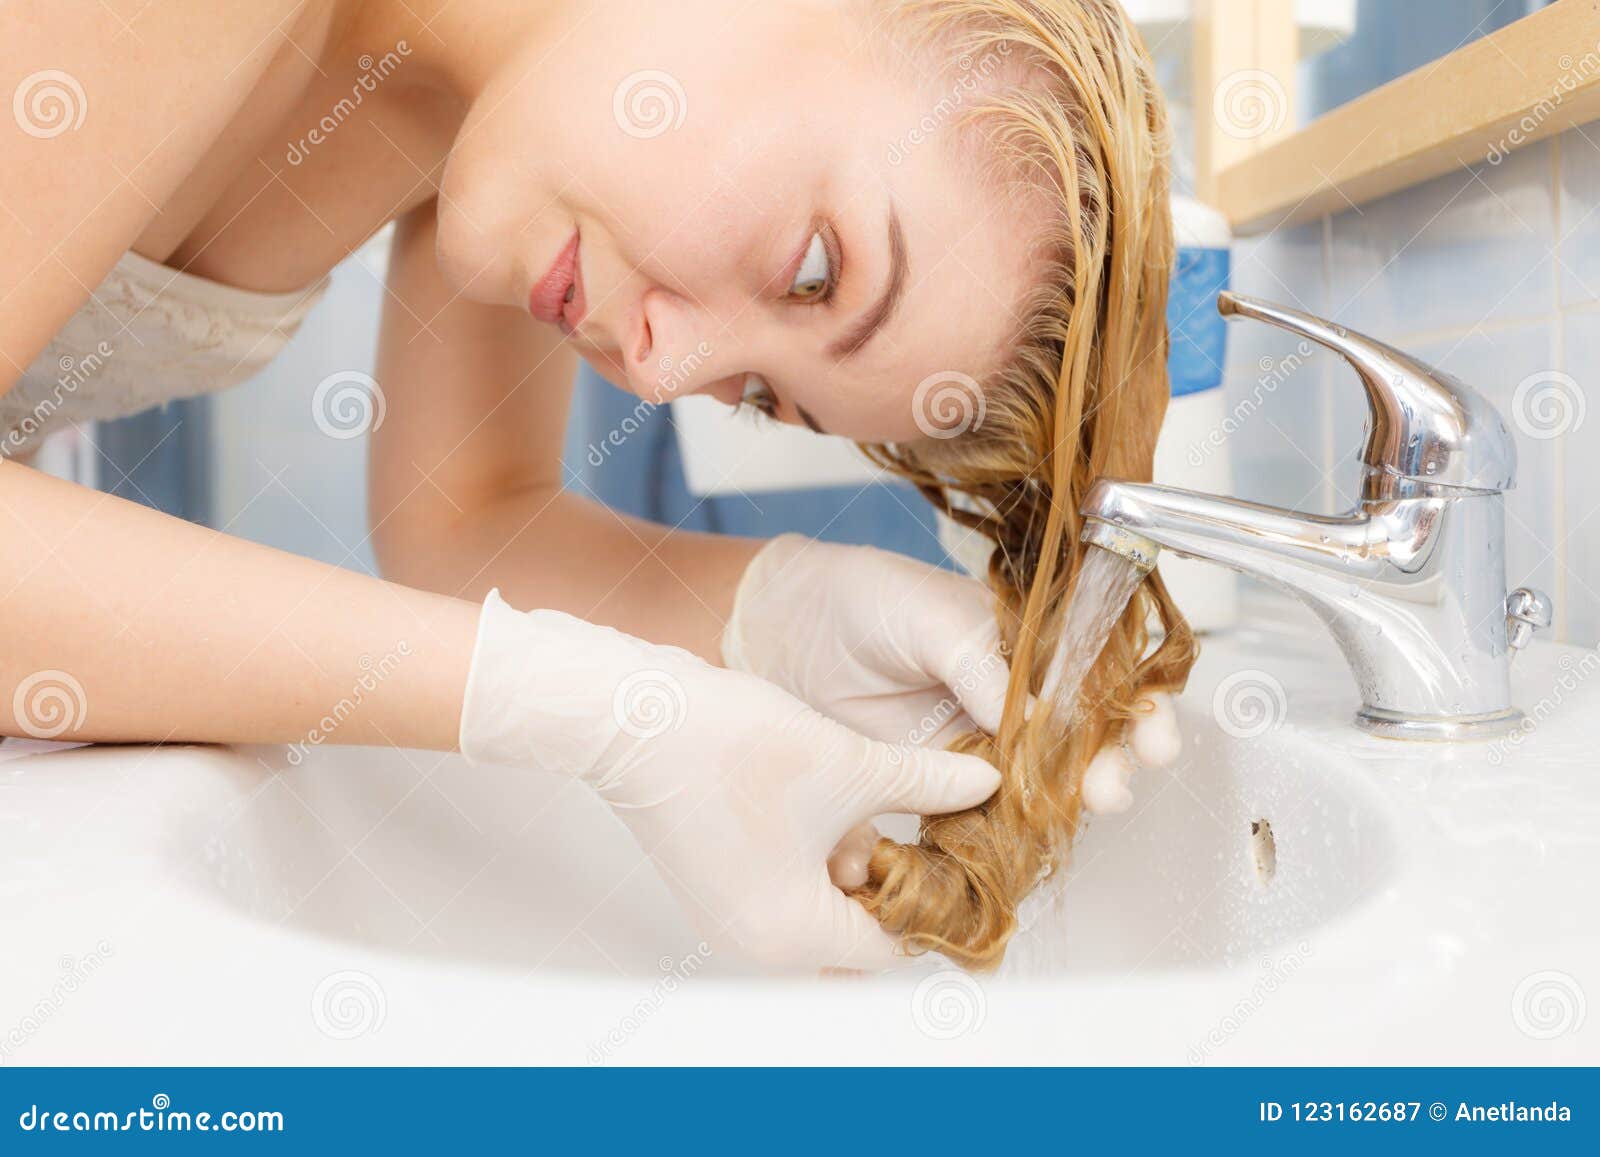 Woman Washing Her Hair In Sink Stock Image Image Of Long